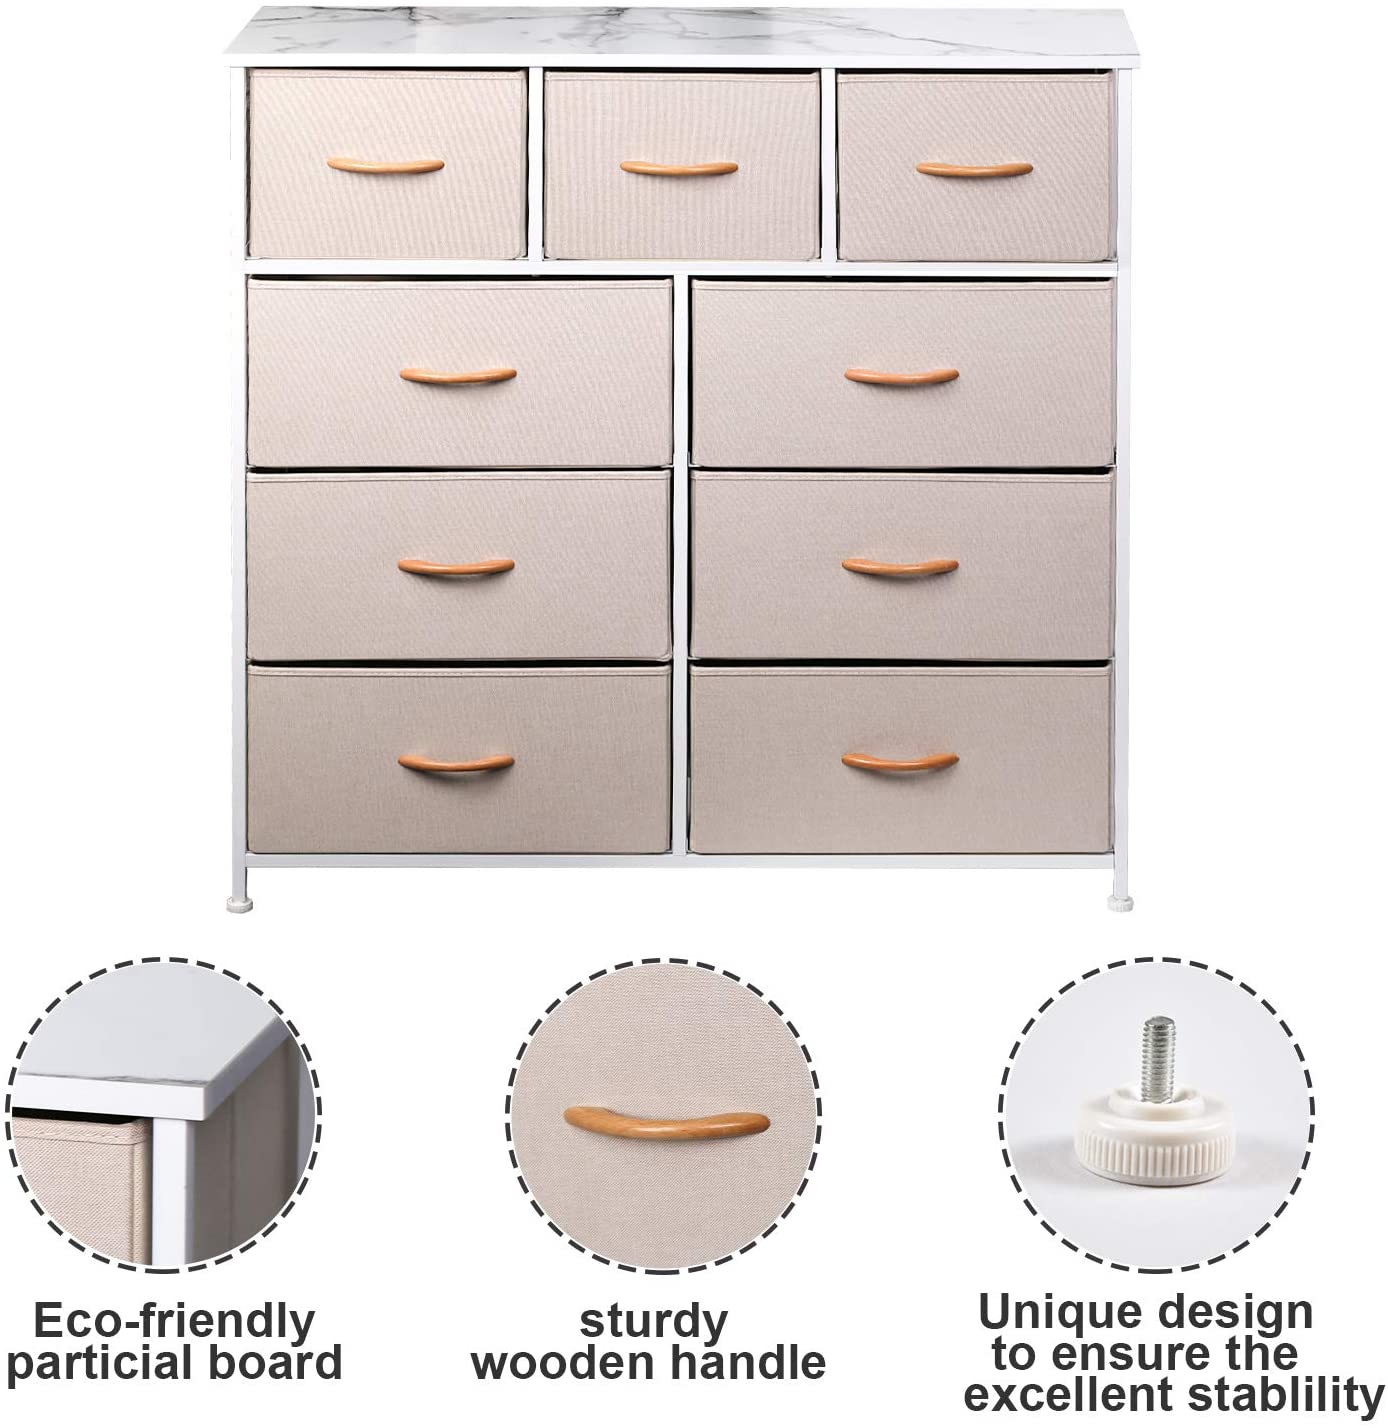 CERBIOR Wide Drawer Dresser Storage Organizer 9-Drawer Closet Shelves, Sturdy Steel Frame Marbling Wood Top with Easy Pull Fabric Bins for Clothing, Blankets (9-Cream Drawers)